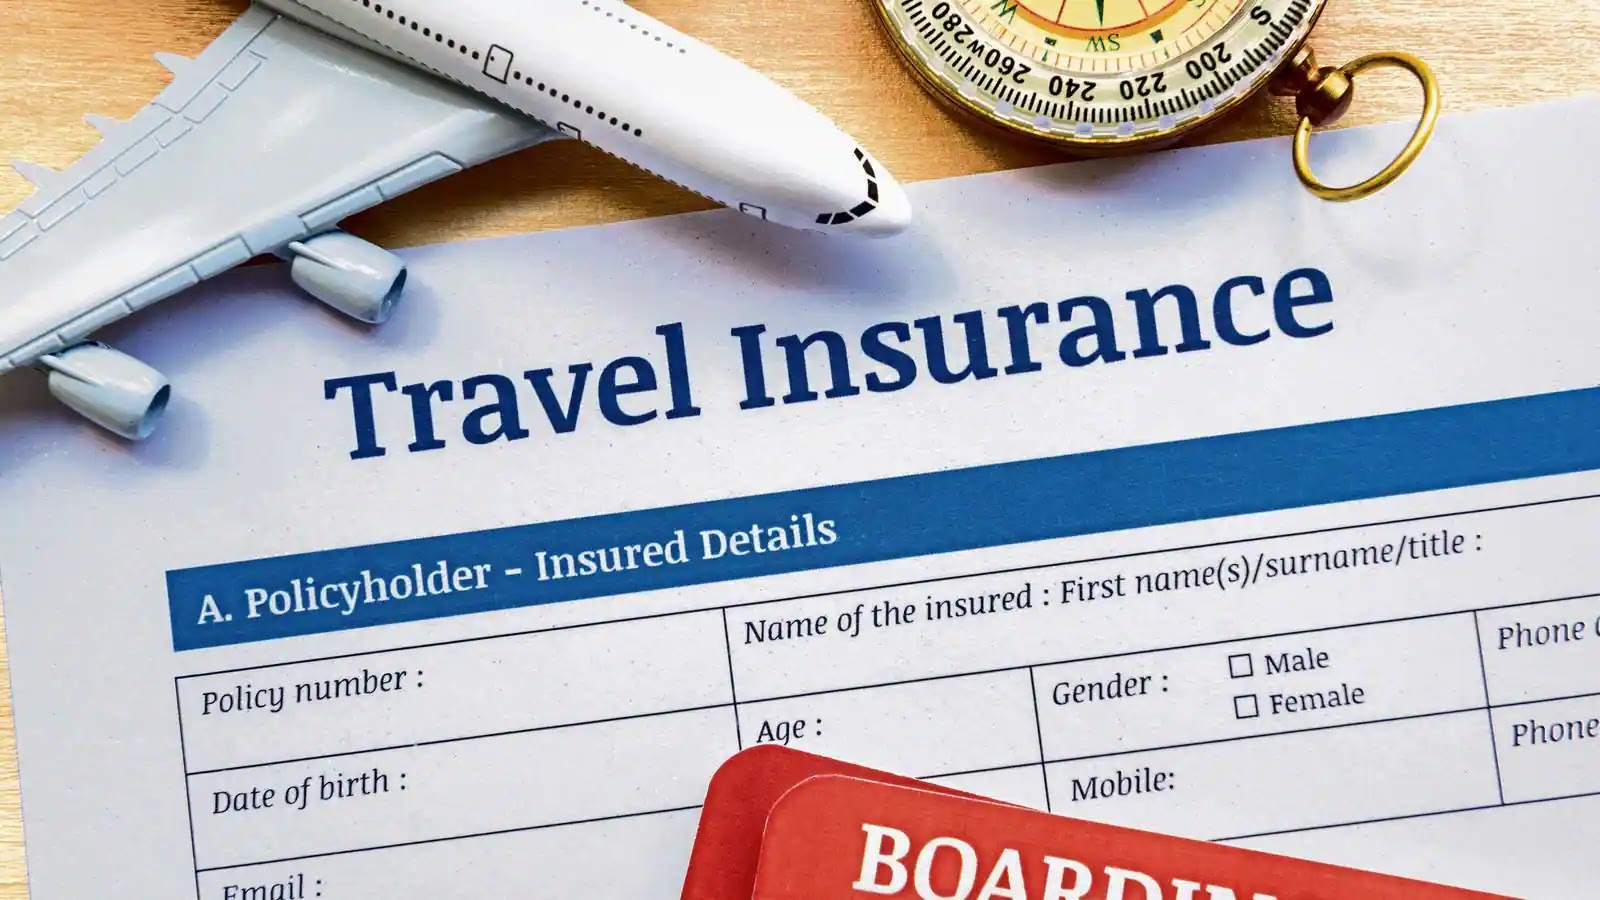 III. Coverage Types Offered by Travel Insurance